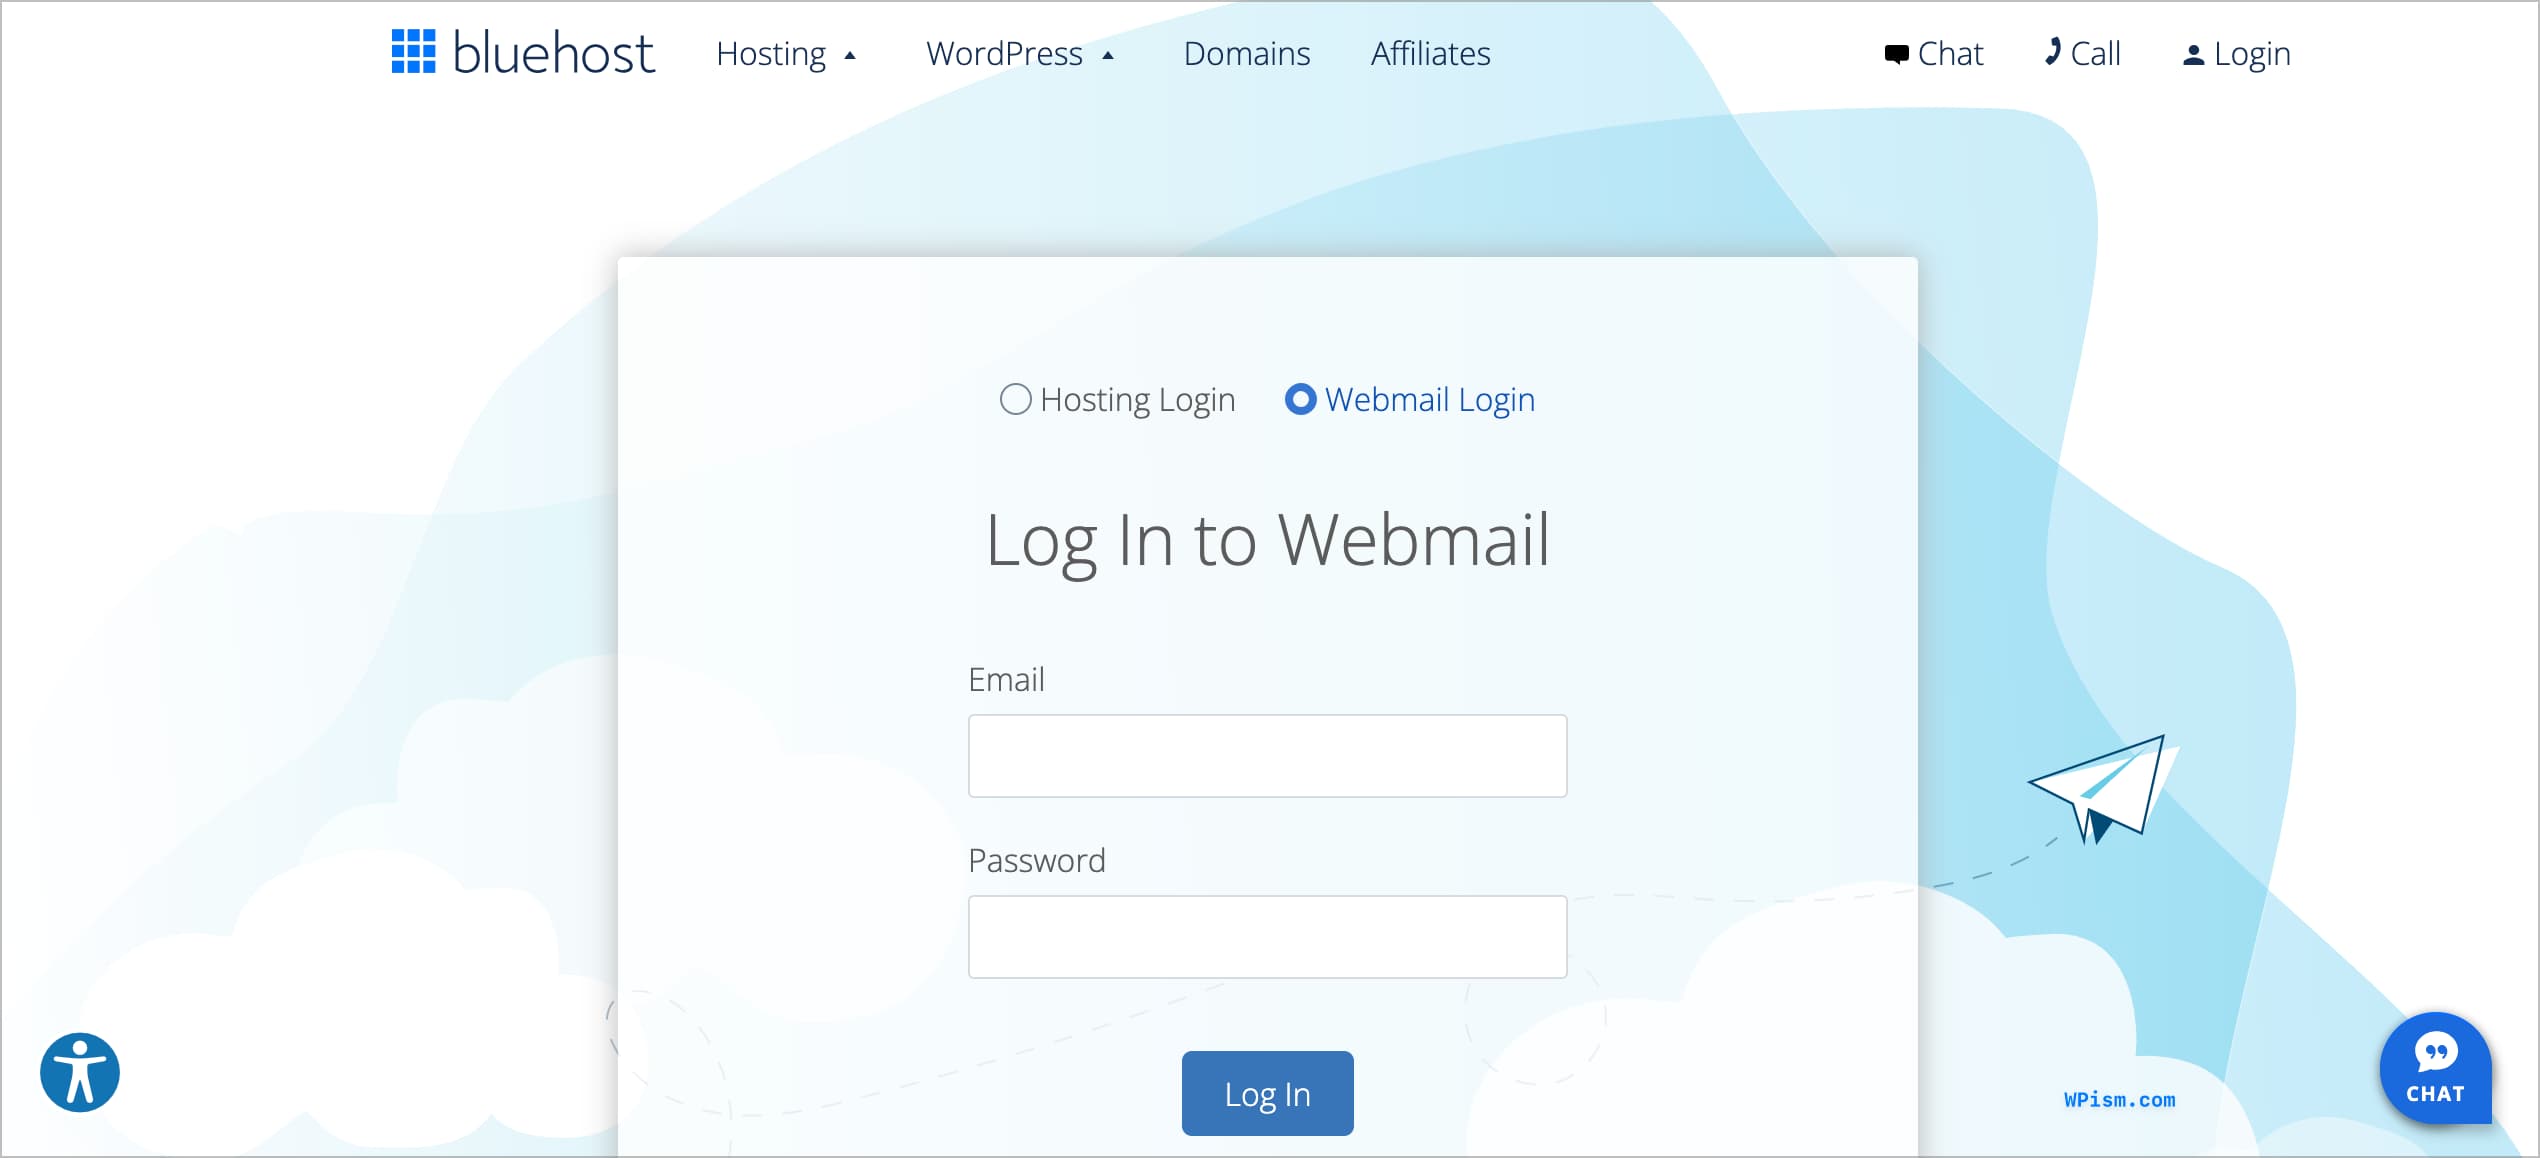 Bluehost Login into Webmail Account